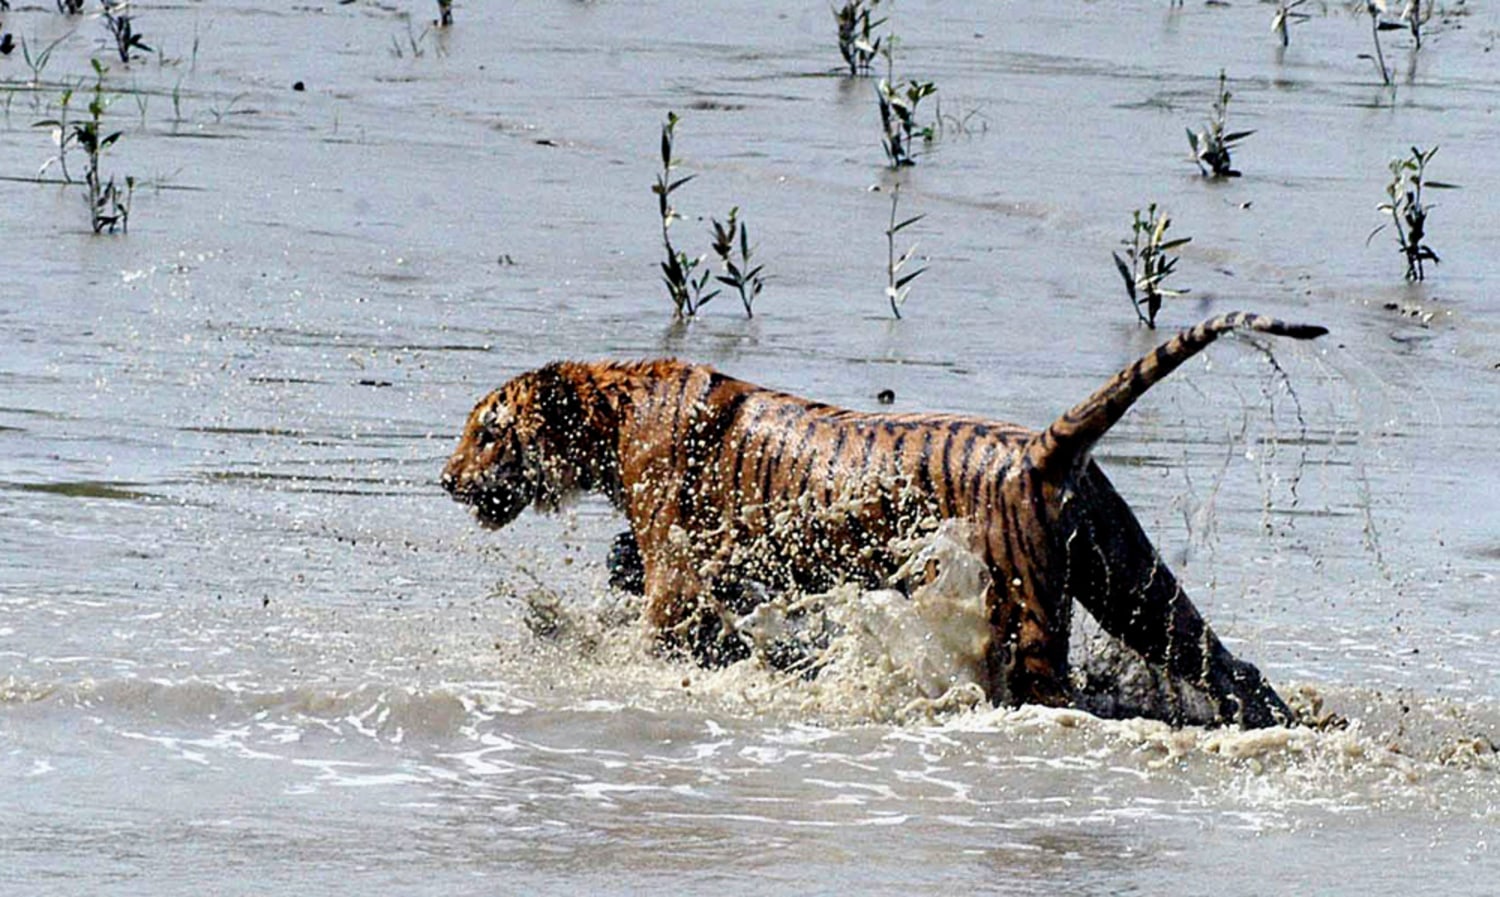 Tigers, humans forced to cohabit India forest